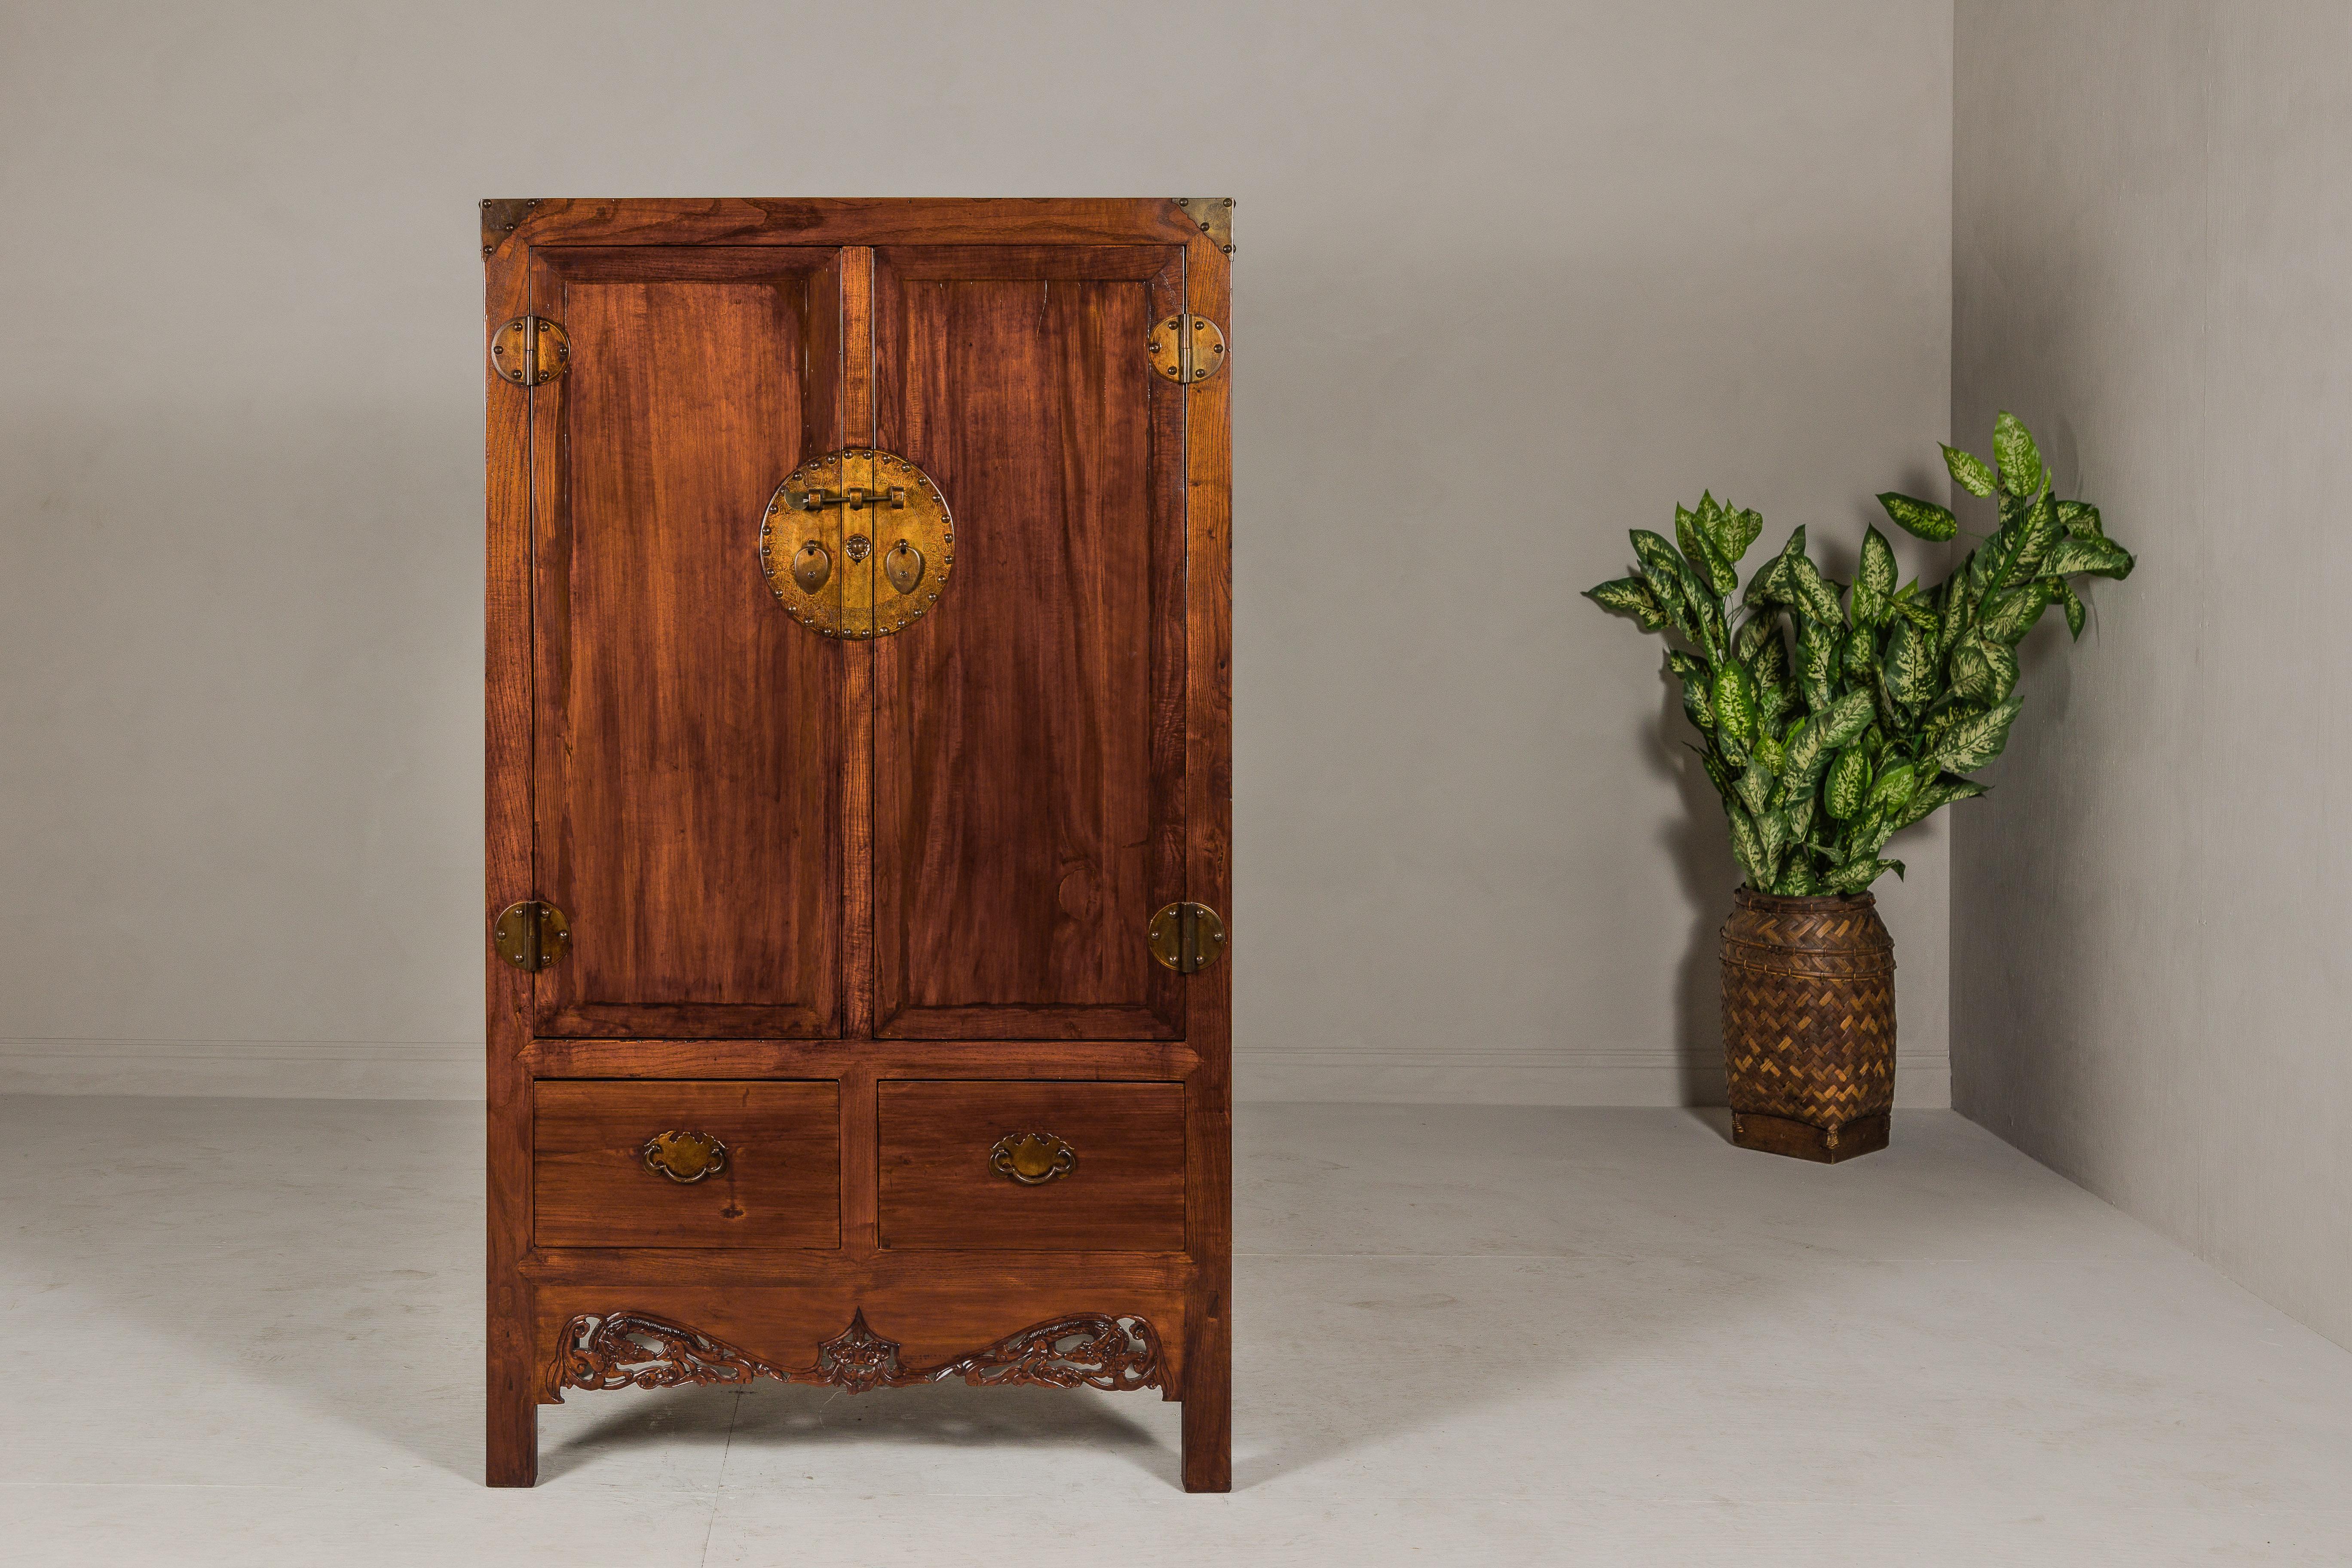 A Chinese Qing Dynasty period large elwood cabinet from the 19th century with brown lacquer, carved fretwork skirt, round medallion hardware, two exterior drawers, interior shelves with hidden drawers. This Chinese Qing Dynasty period large elwood